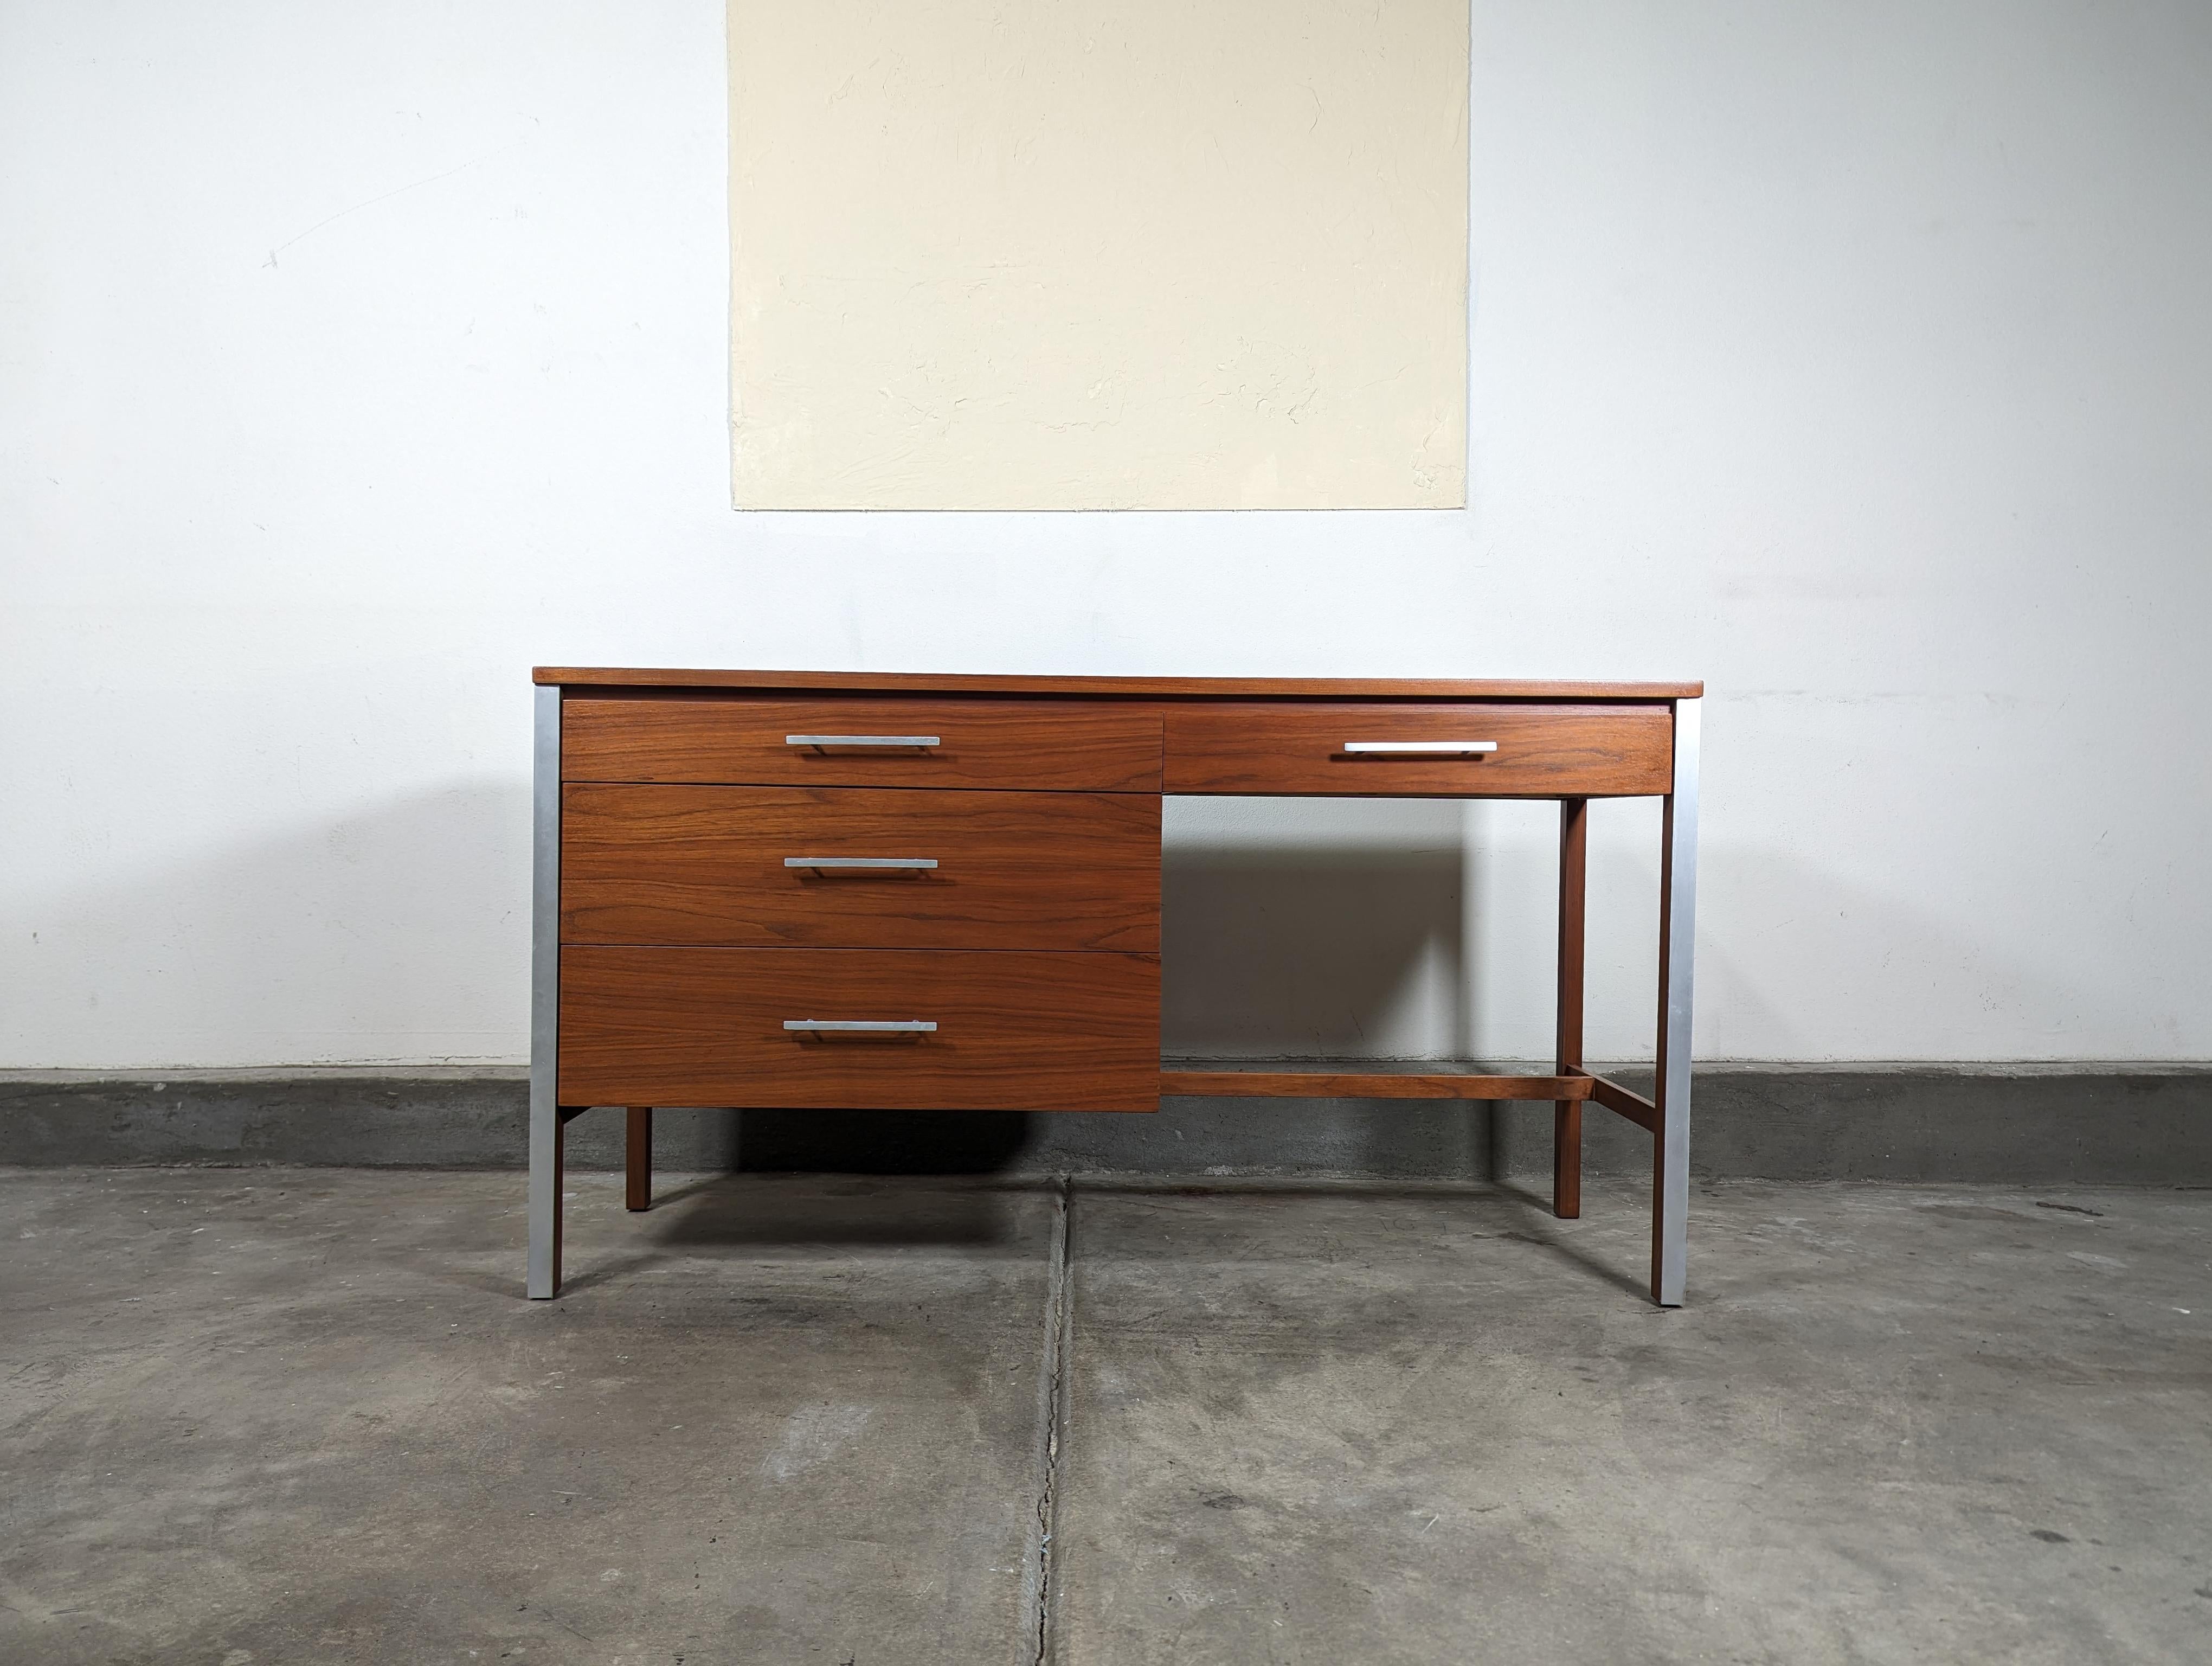 Step back in time with this show-stopping vintage mid century walnut desk, artfully designed by the renowned Paul McCobb. This piece is a quintessential representation of American mid century modern aesthetic - featuring clean lines, thoughtful